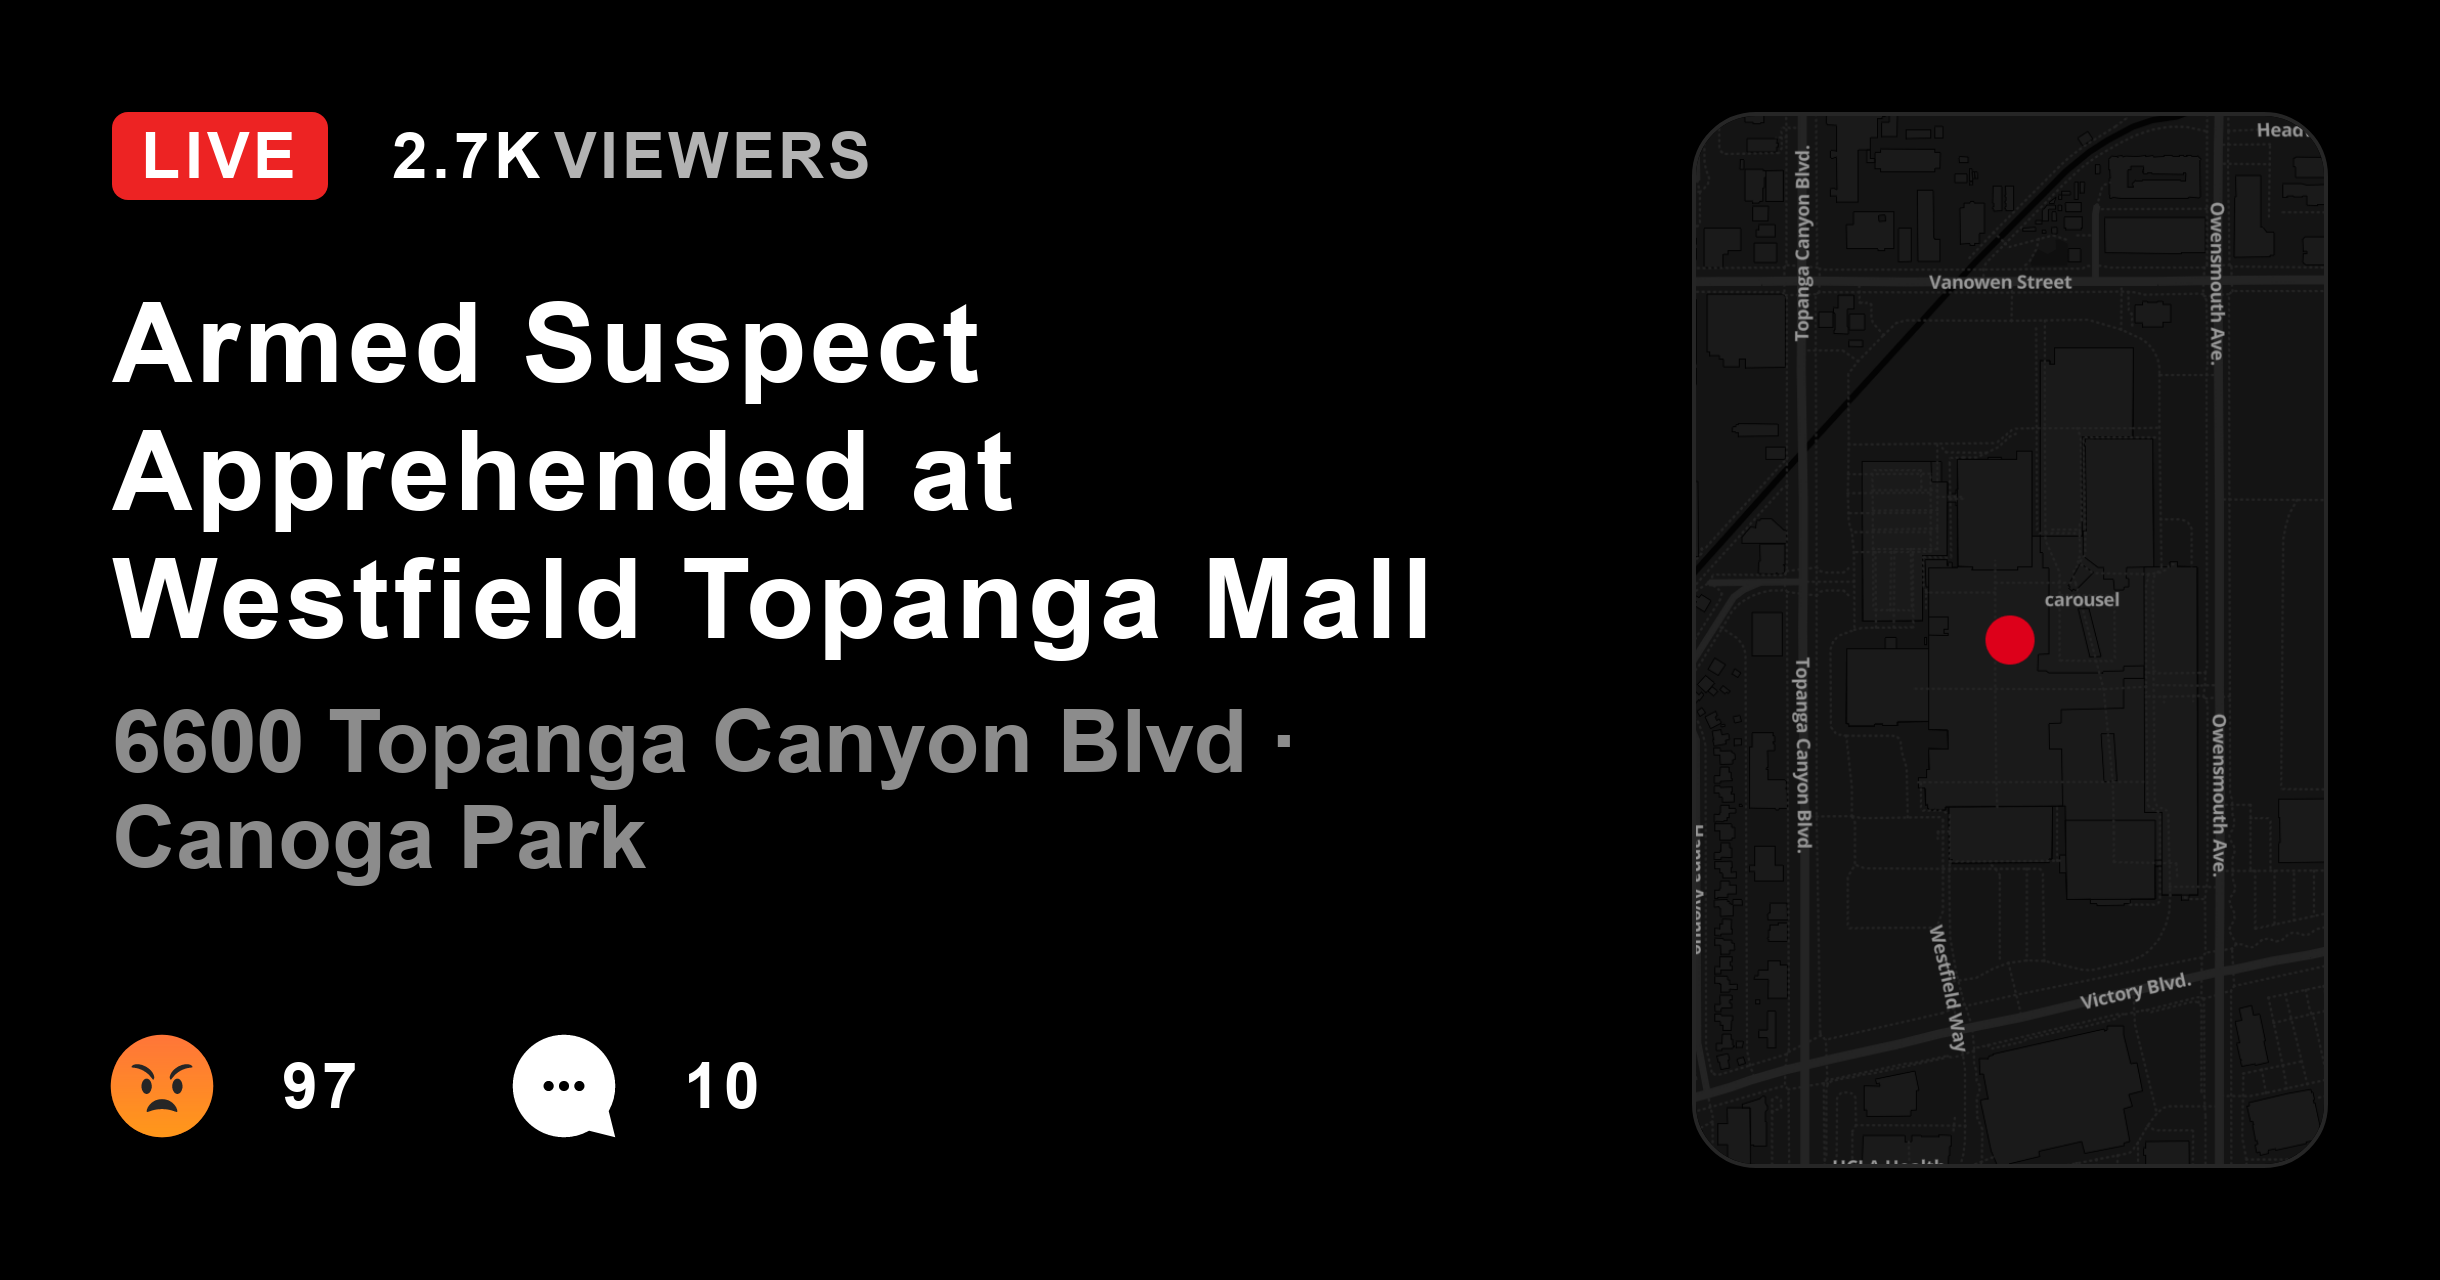 Armed Suspect Apprehended at Westfield Topanga Mall @Citizen